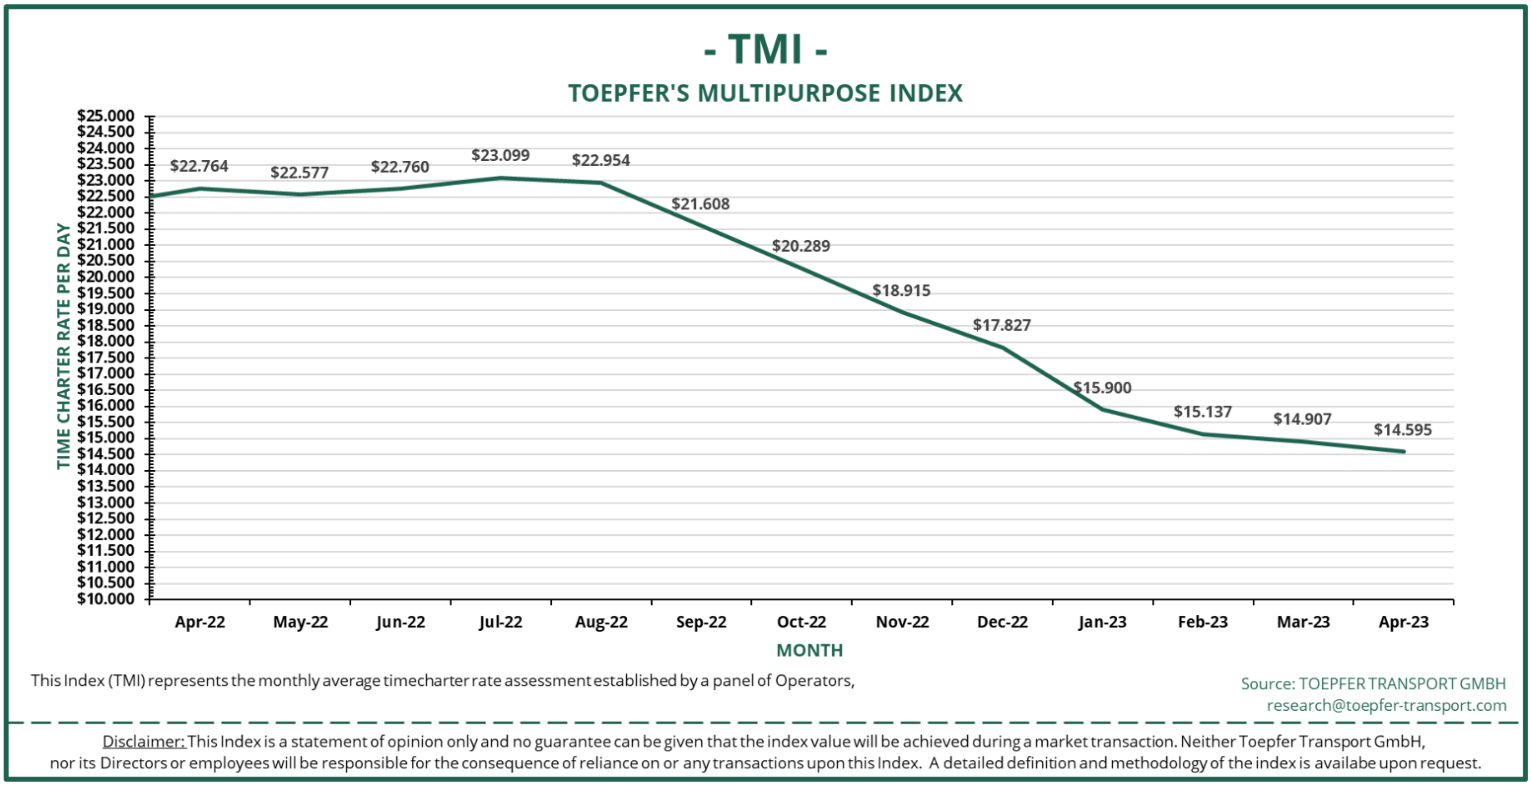 Toepfer Transport: more obstacles in the MPP sector than anticipated